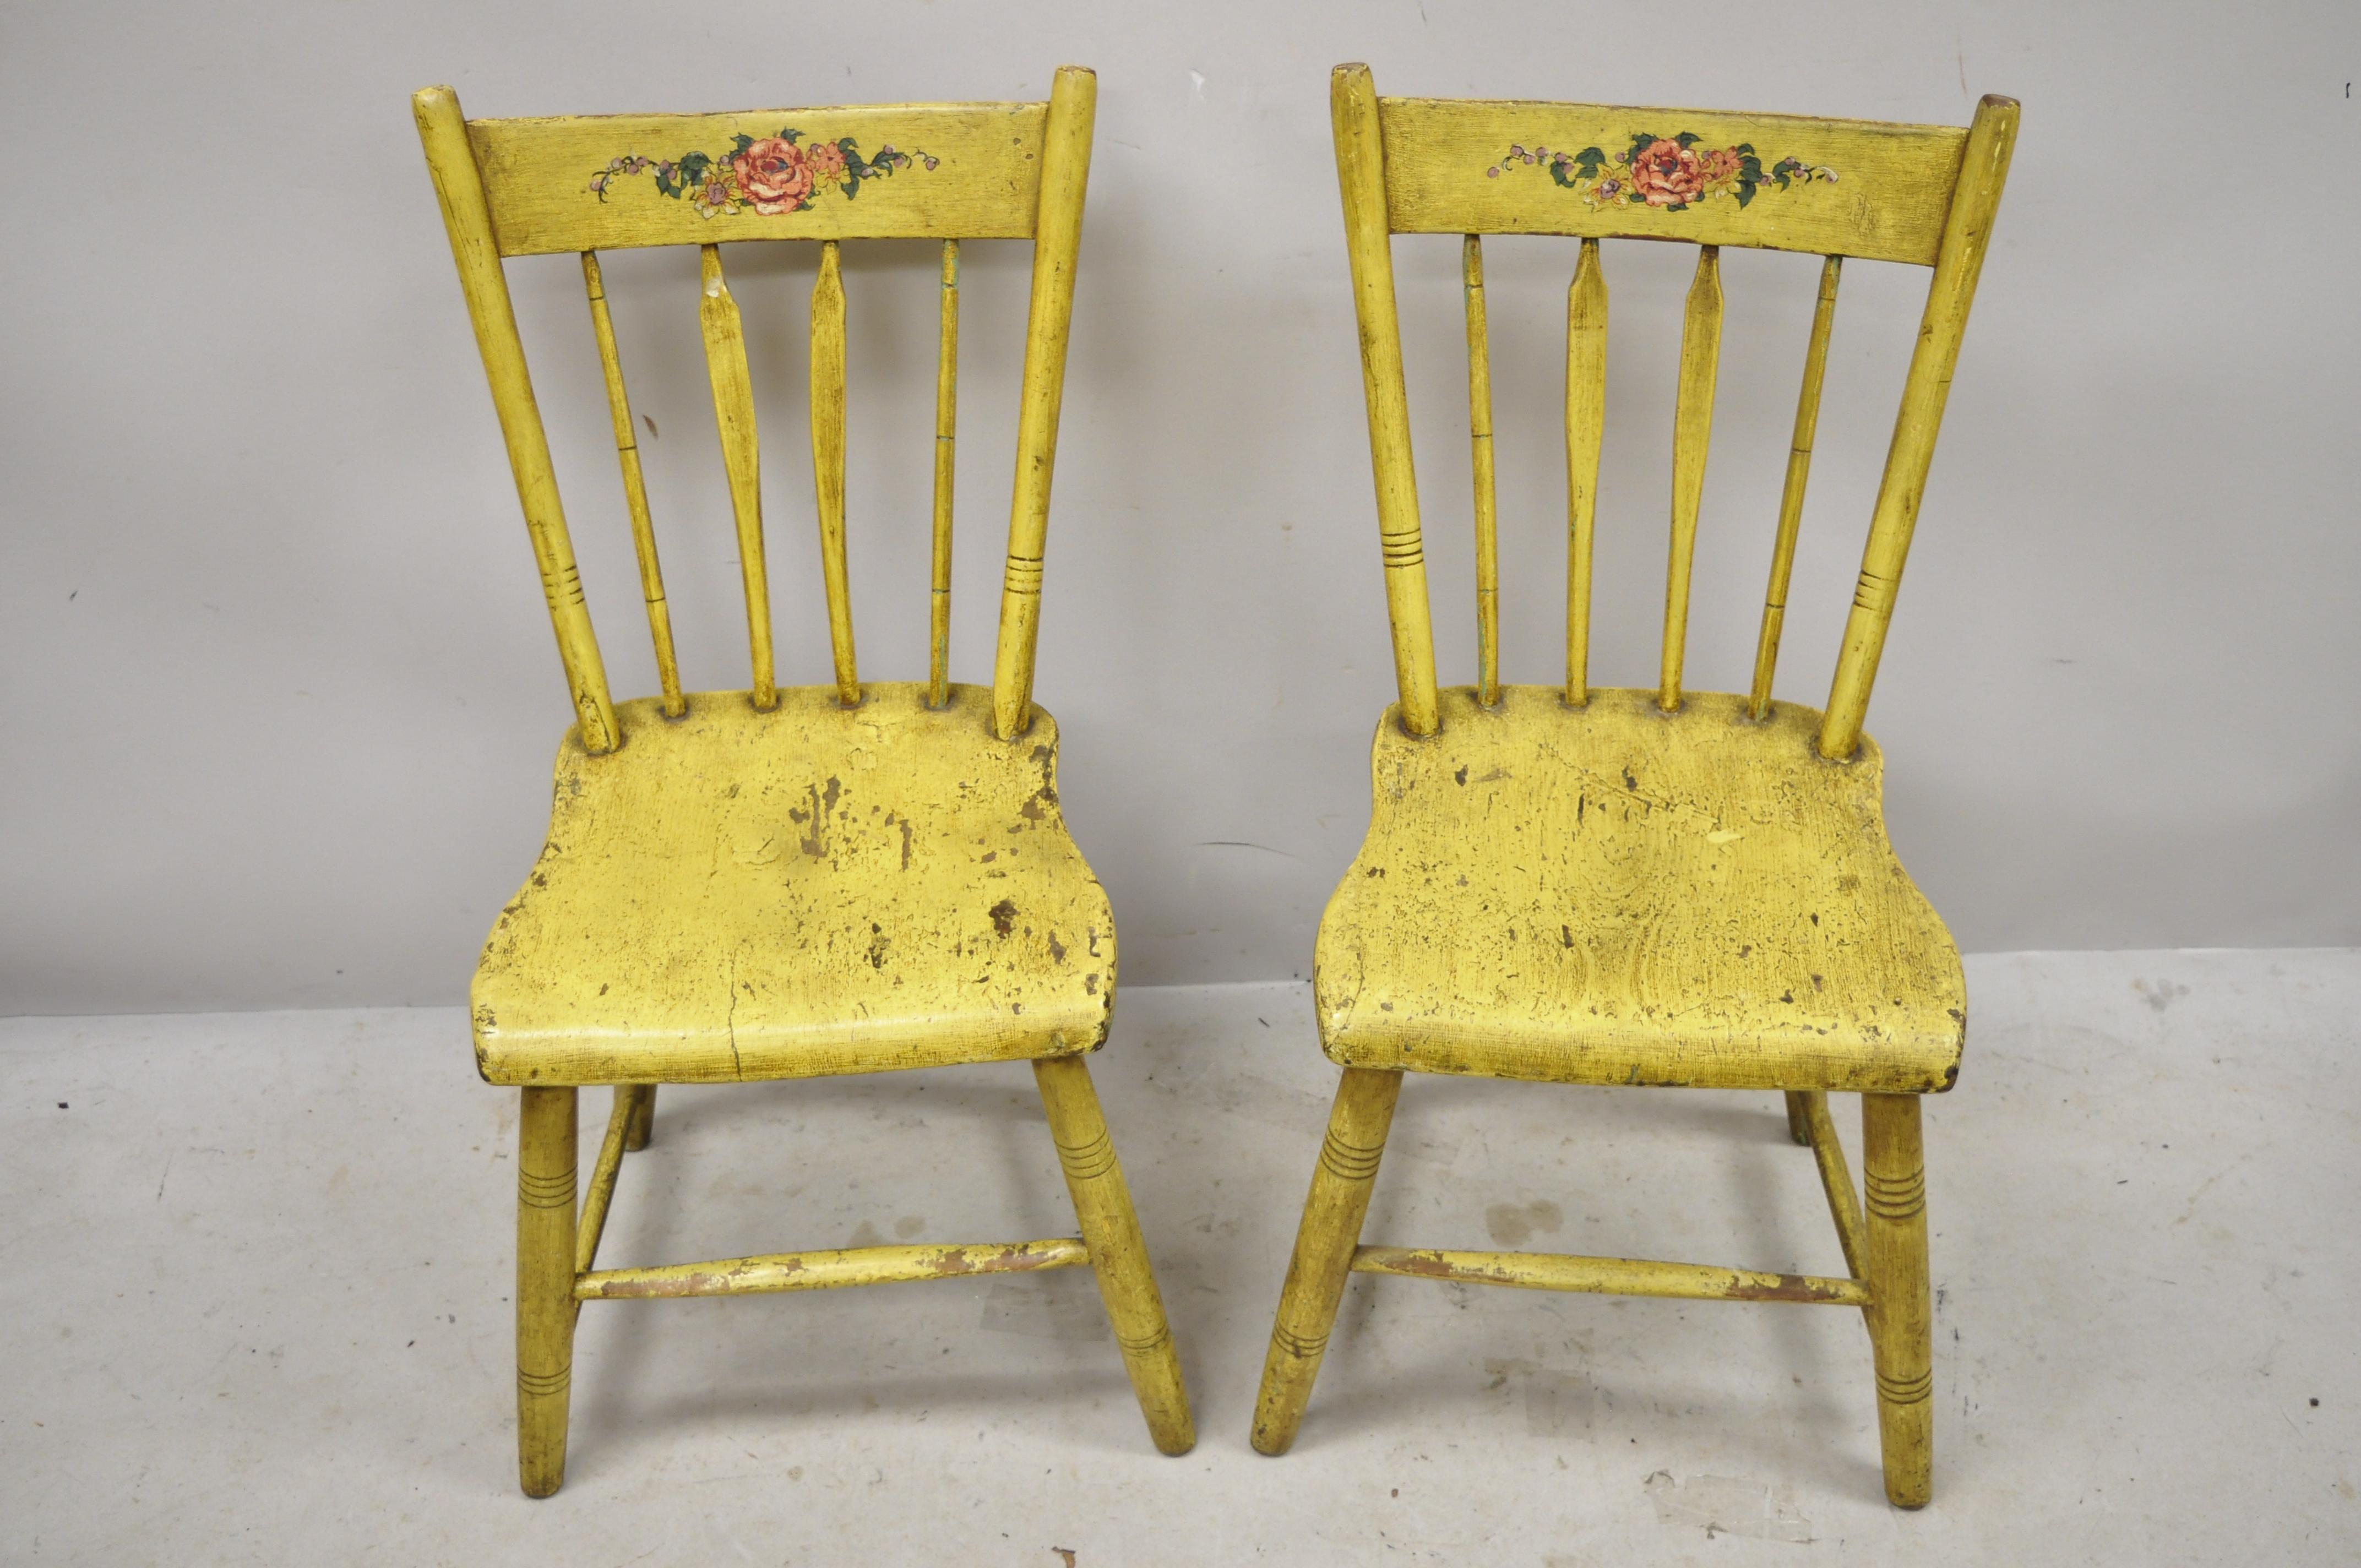 Frederick Loeser & Co Yellow Primitive Hitchcock Style Side Chairs, Pair 'A' For Sale 4